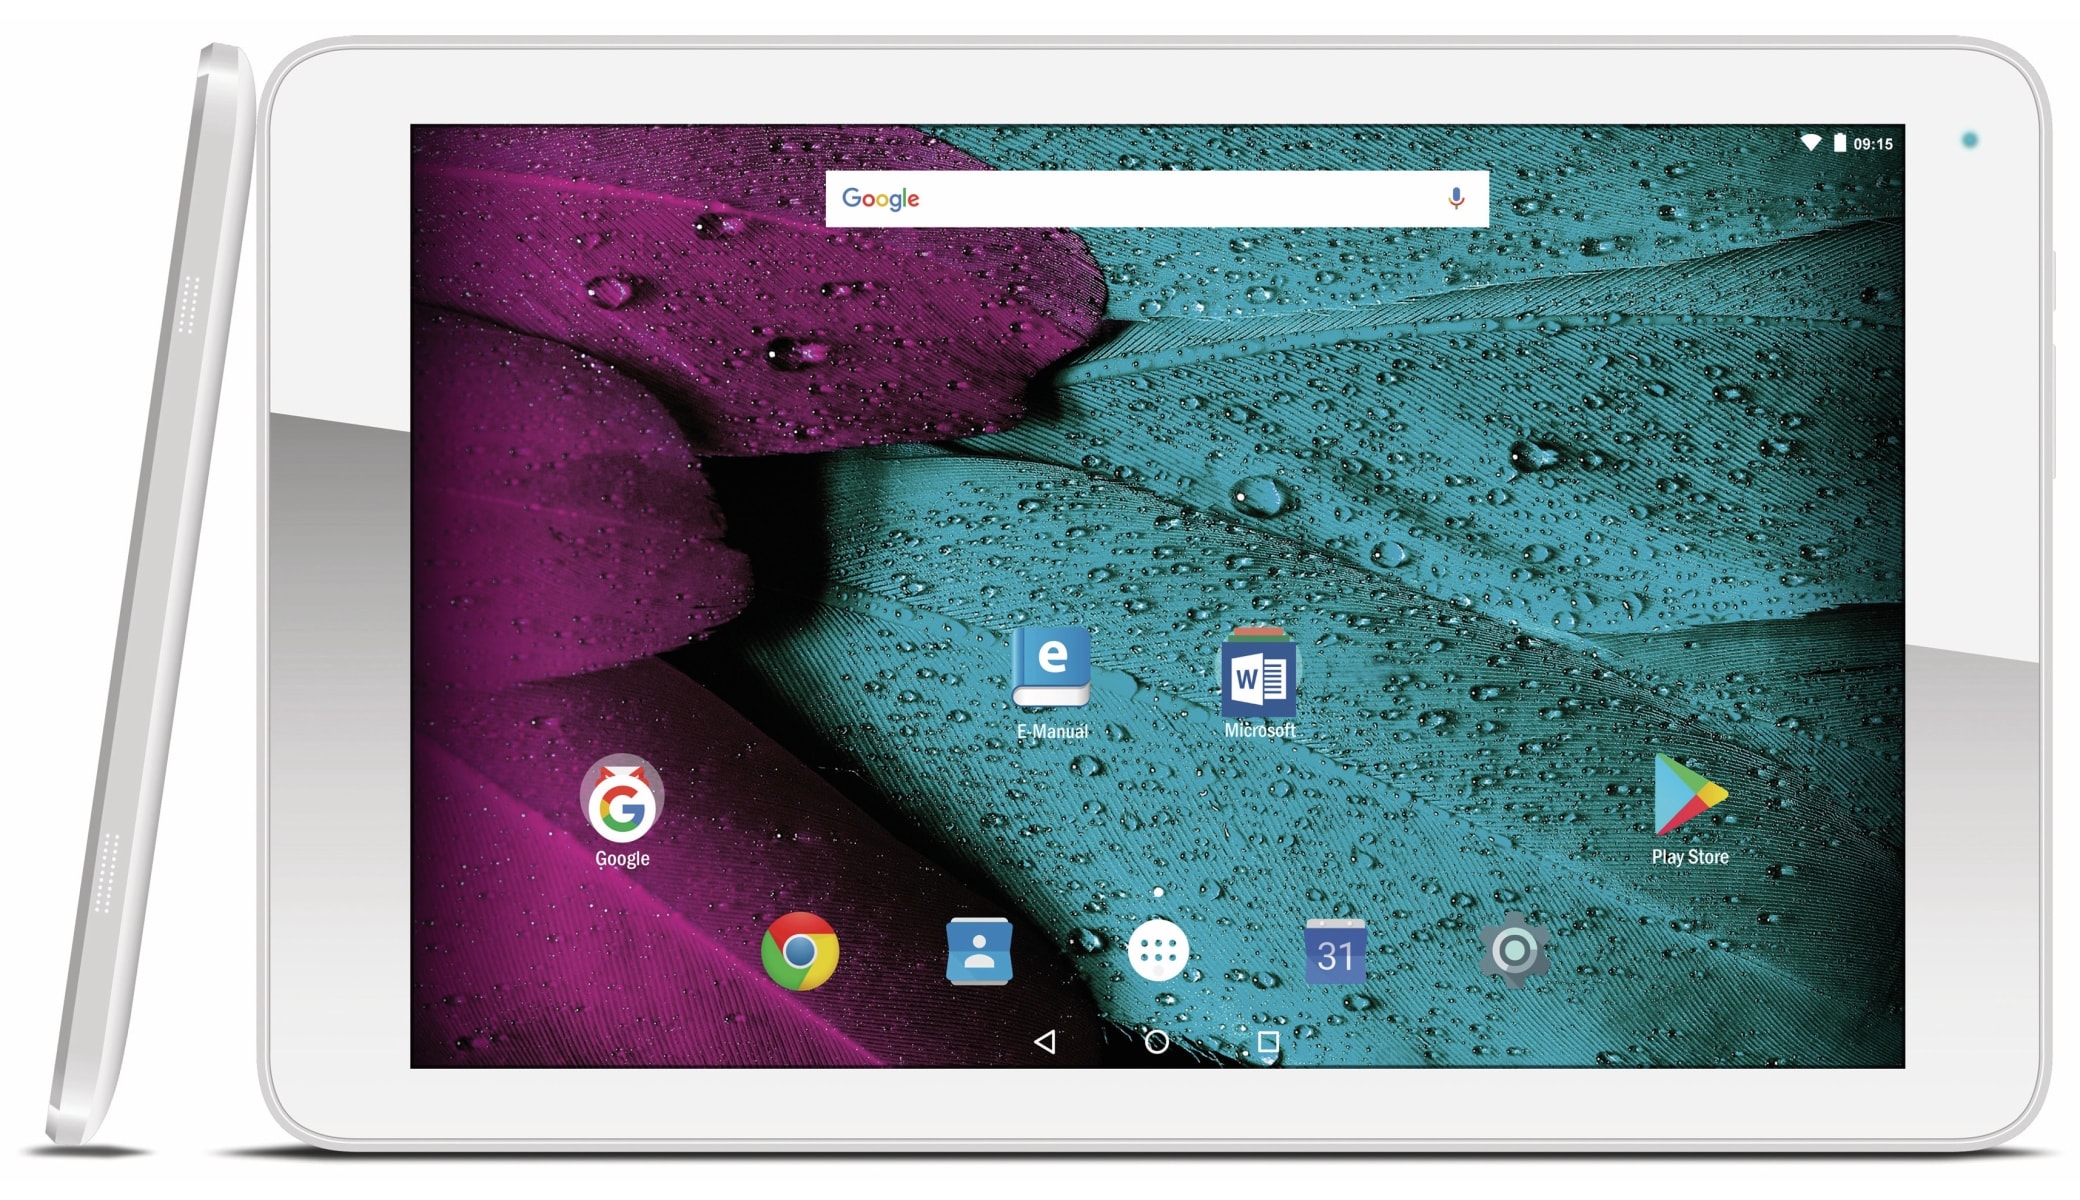 Odys Tablet Pace, 10,1 (25,7 cm), Android 7.0